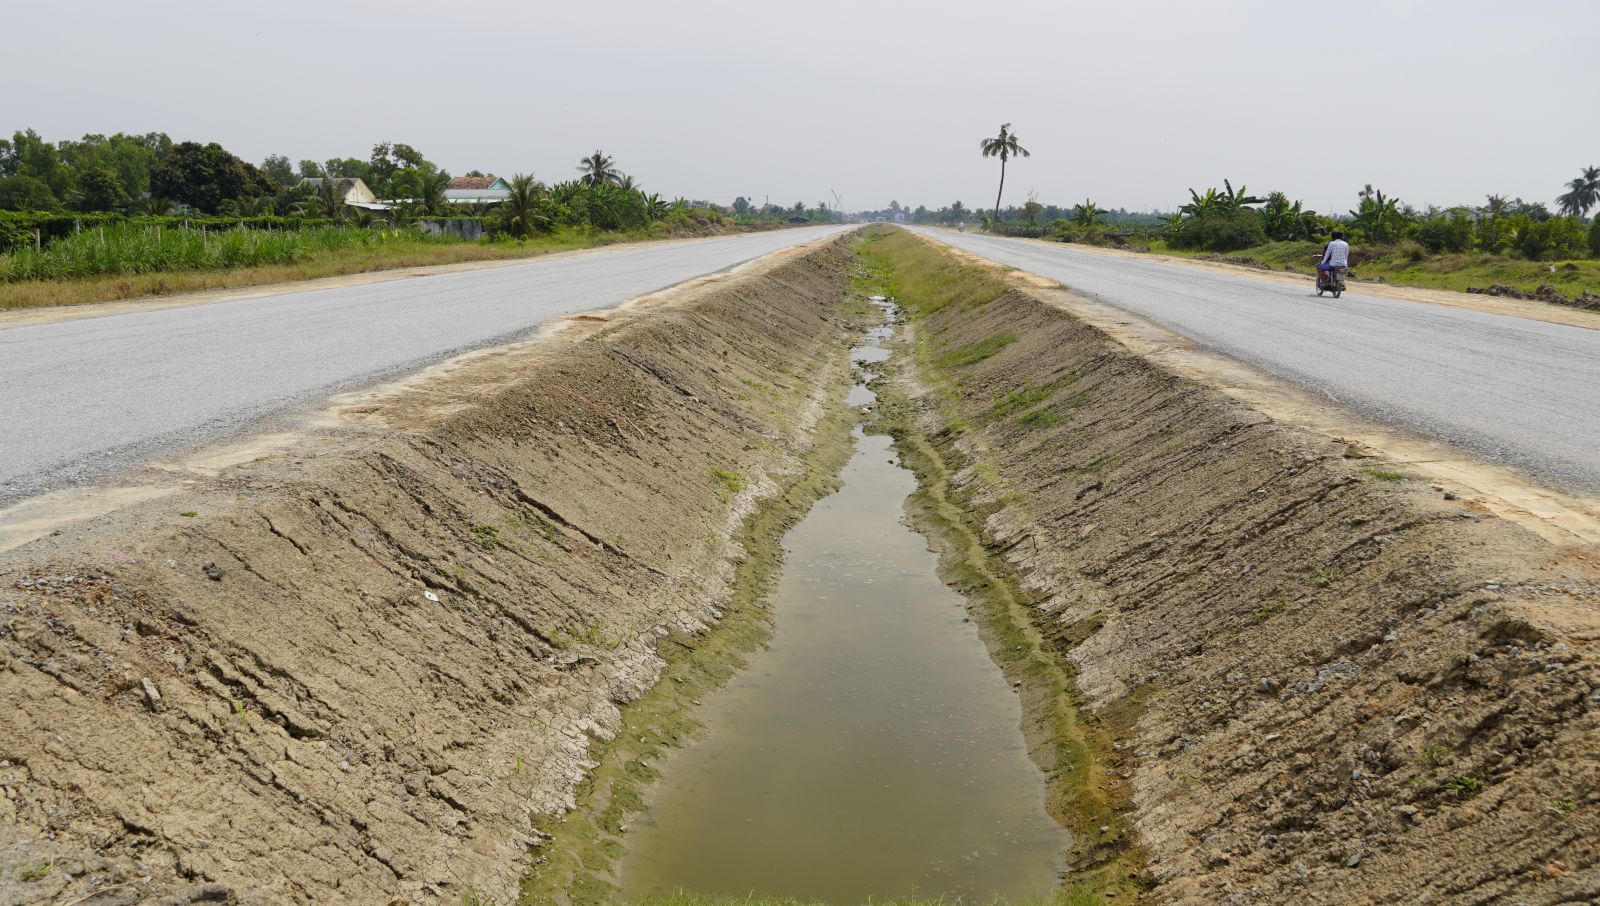 Package 4, part of the 5 kilometers road intersecting National Highway 1A, invested by the Department of Transport, has completed the two sides of the road, the road surface is paved with green stones, rolling 